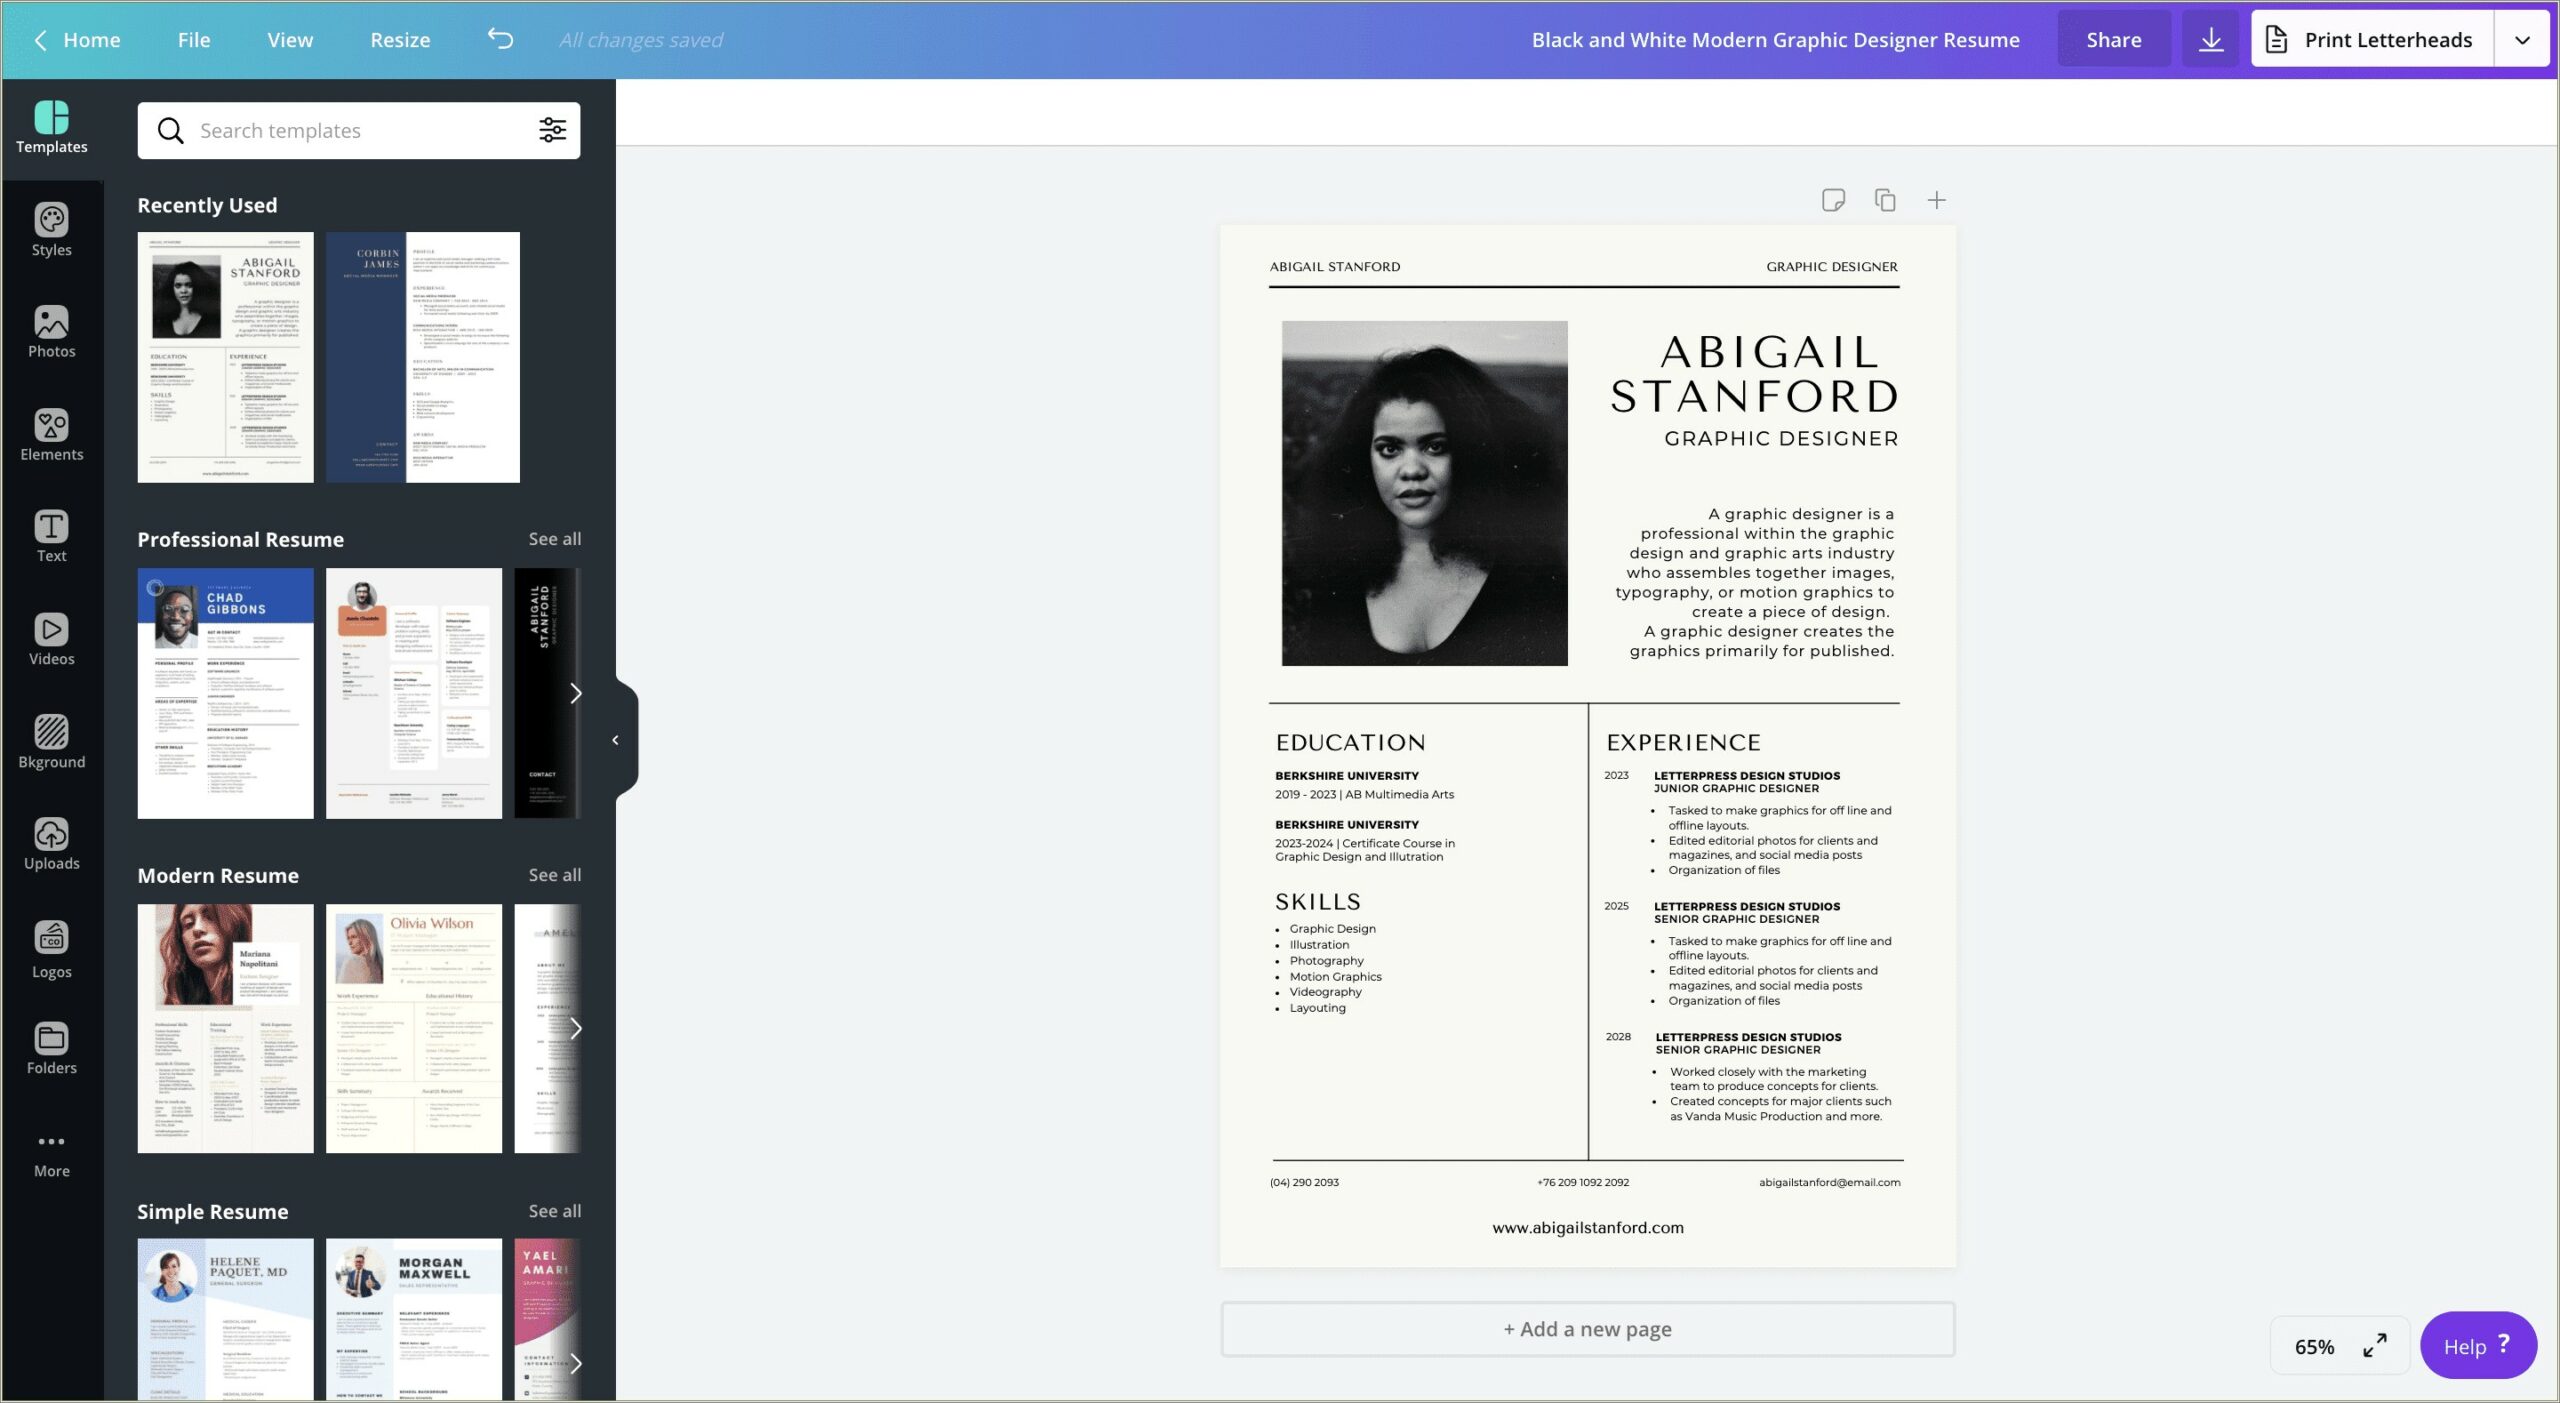 Best Typefaces For A Graphic Designer's Resume